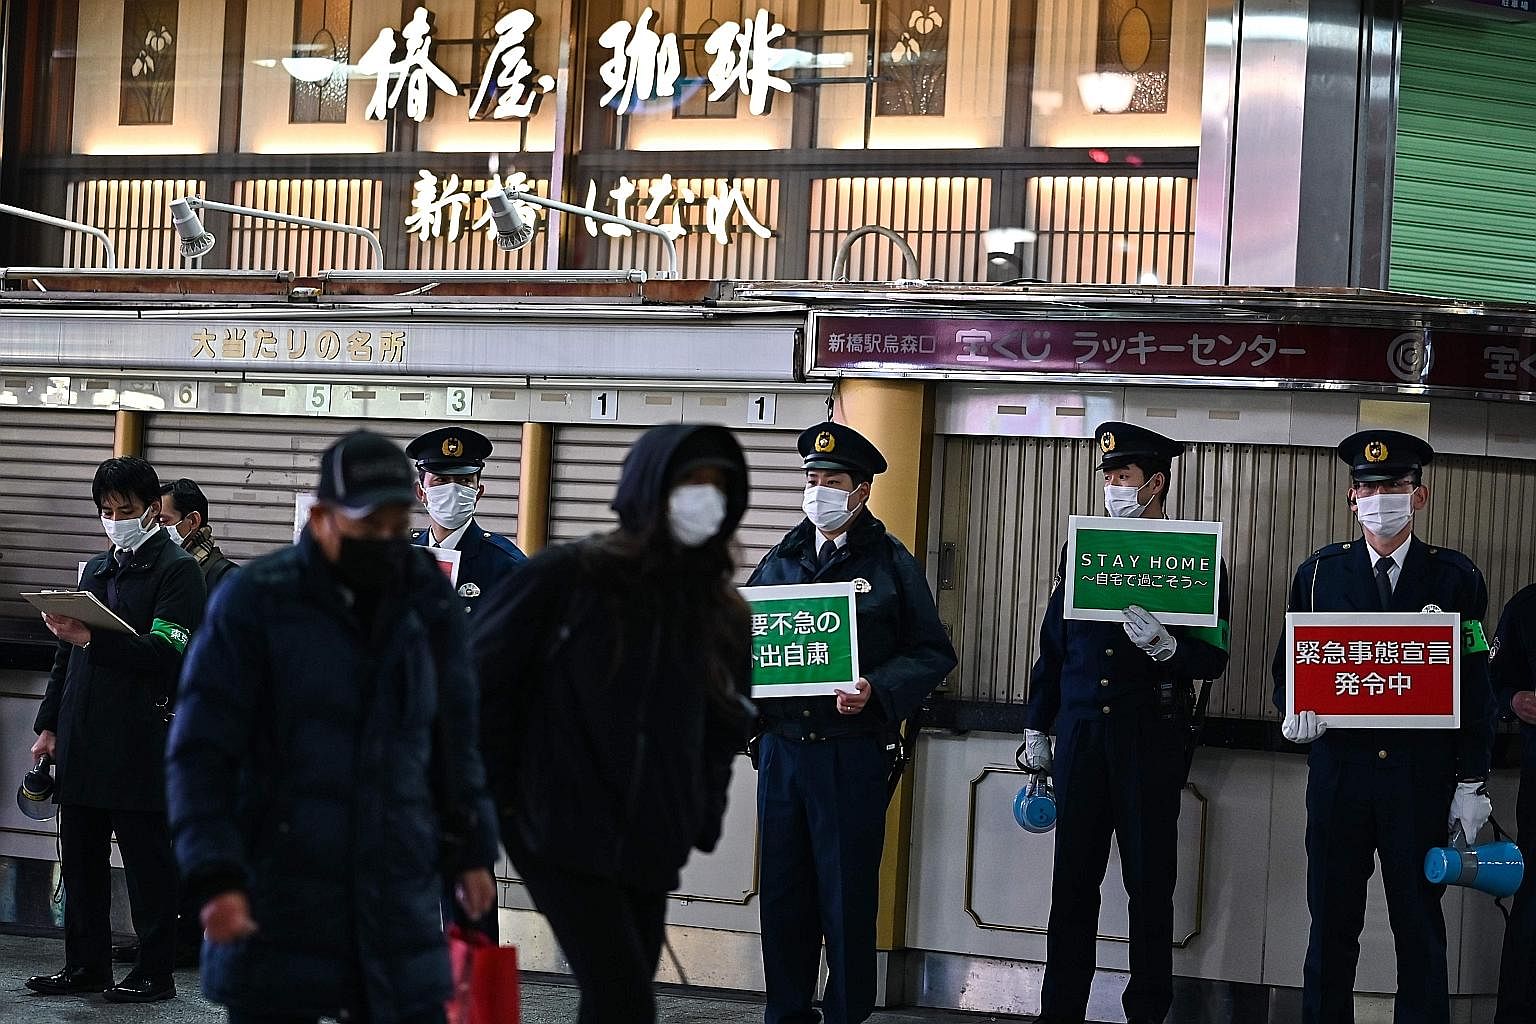 Policemen in Tokyo holding signs last Friday asking people to stay home amid the coronavirus outbreak in the Japanese capital. The seven-day moving average in Tokyo stood at 1,202 cases in the week ending Sunday - down from 1,765 cases in the week of